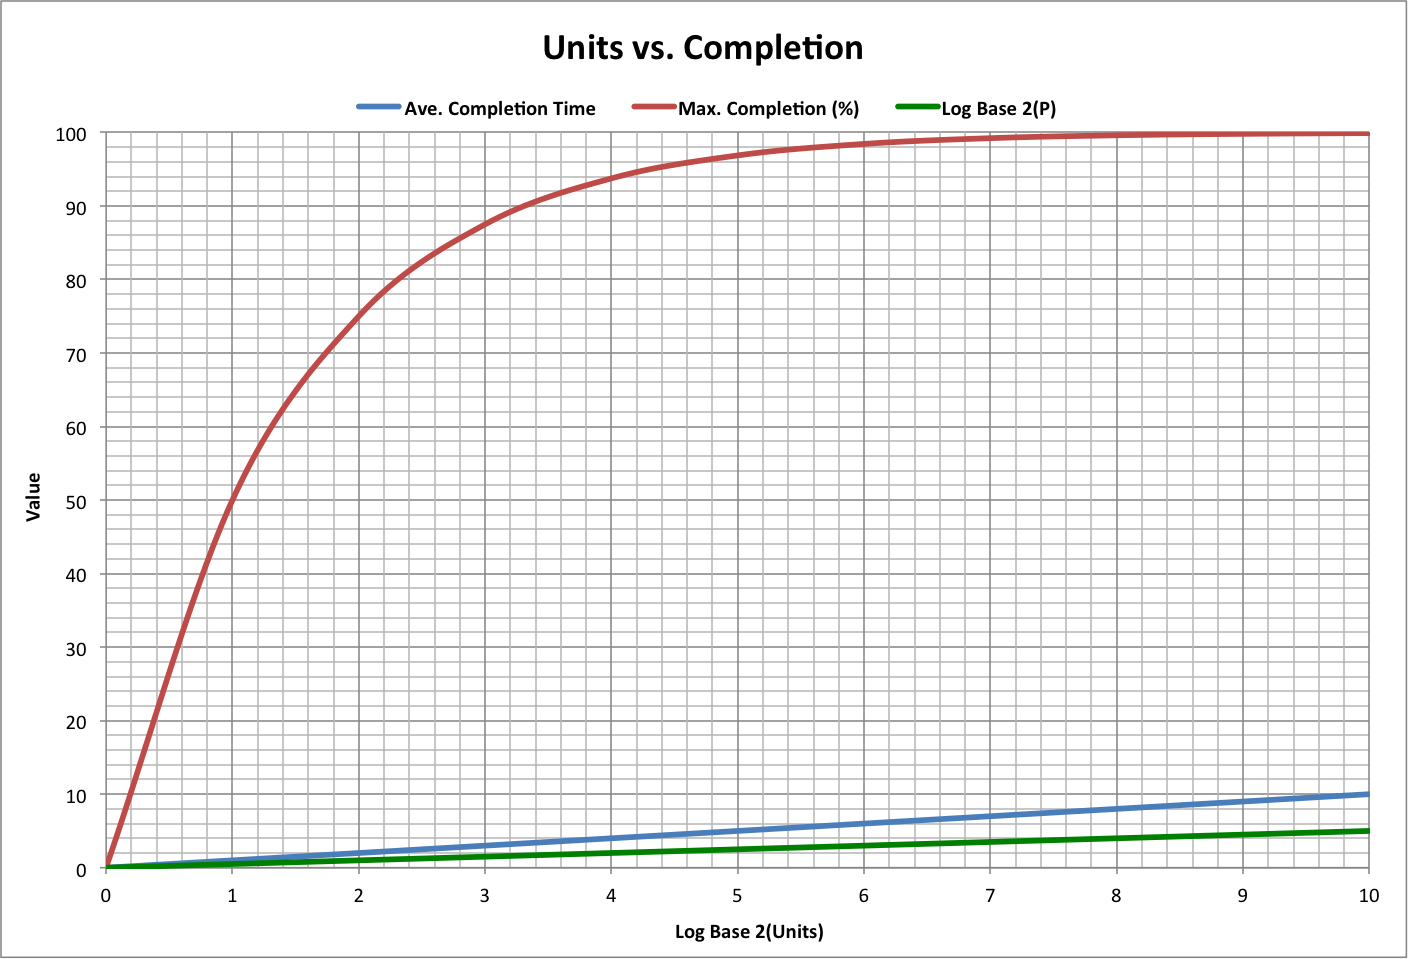 Units vs. Completion